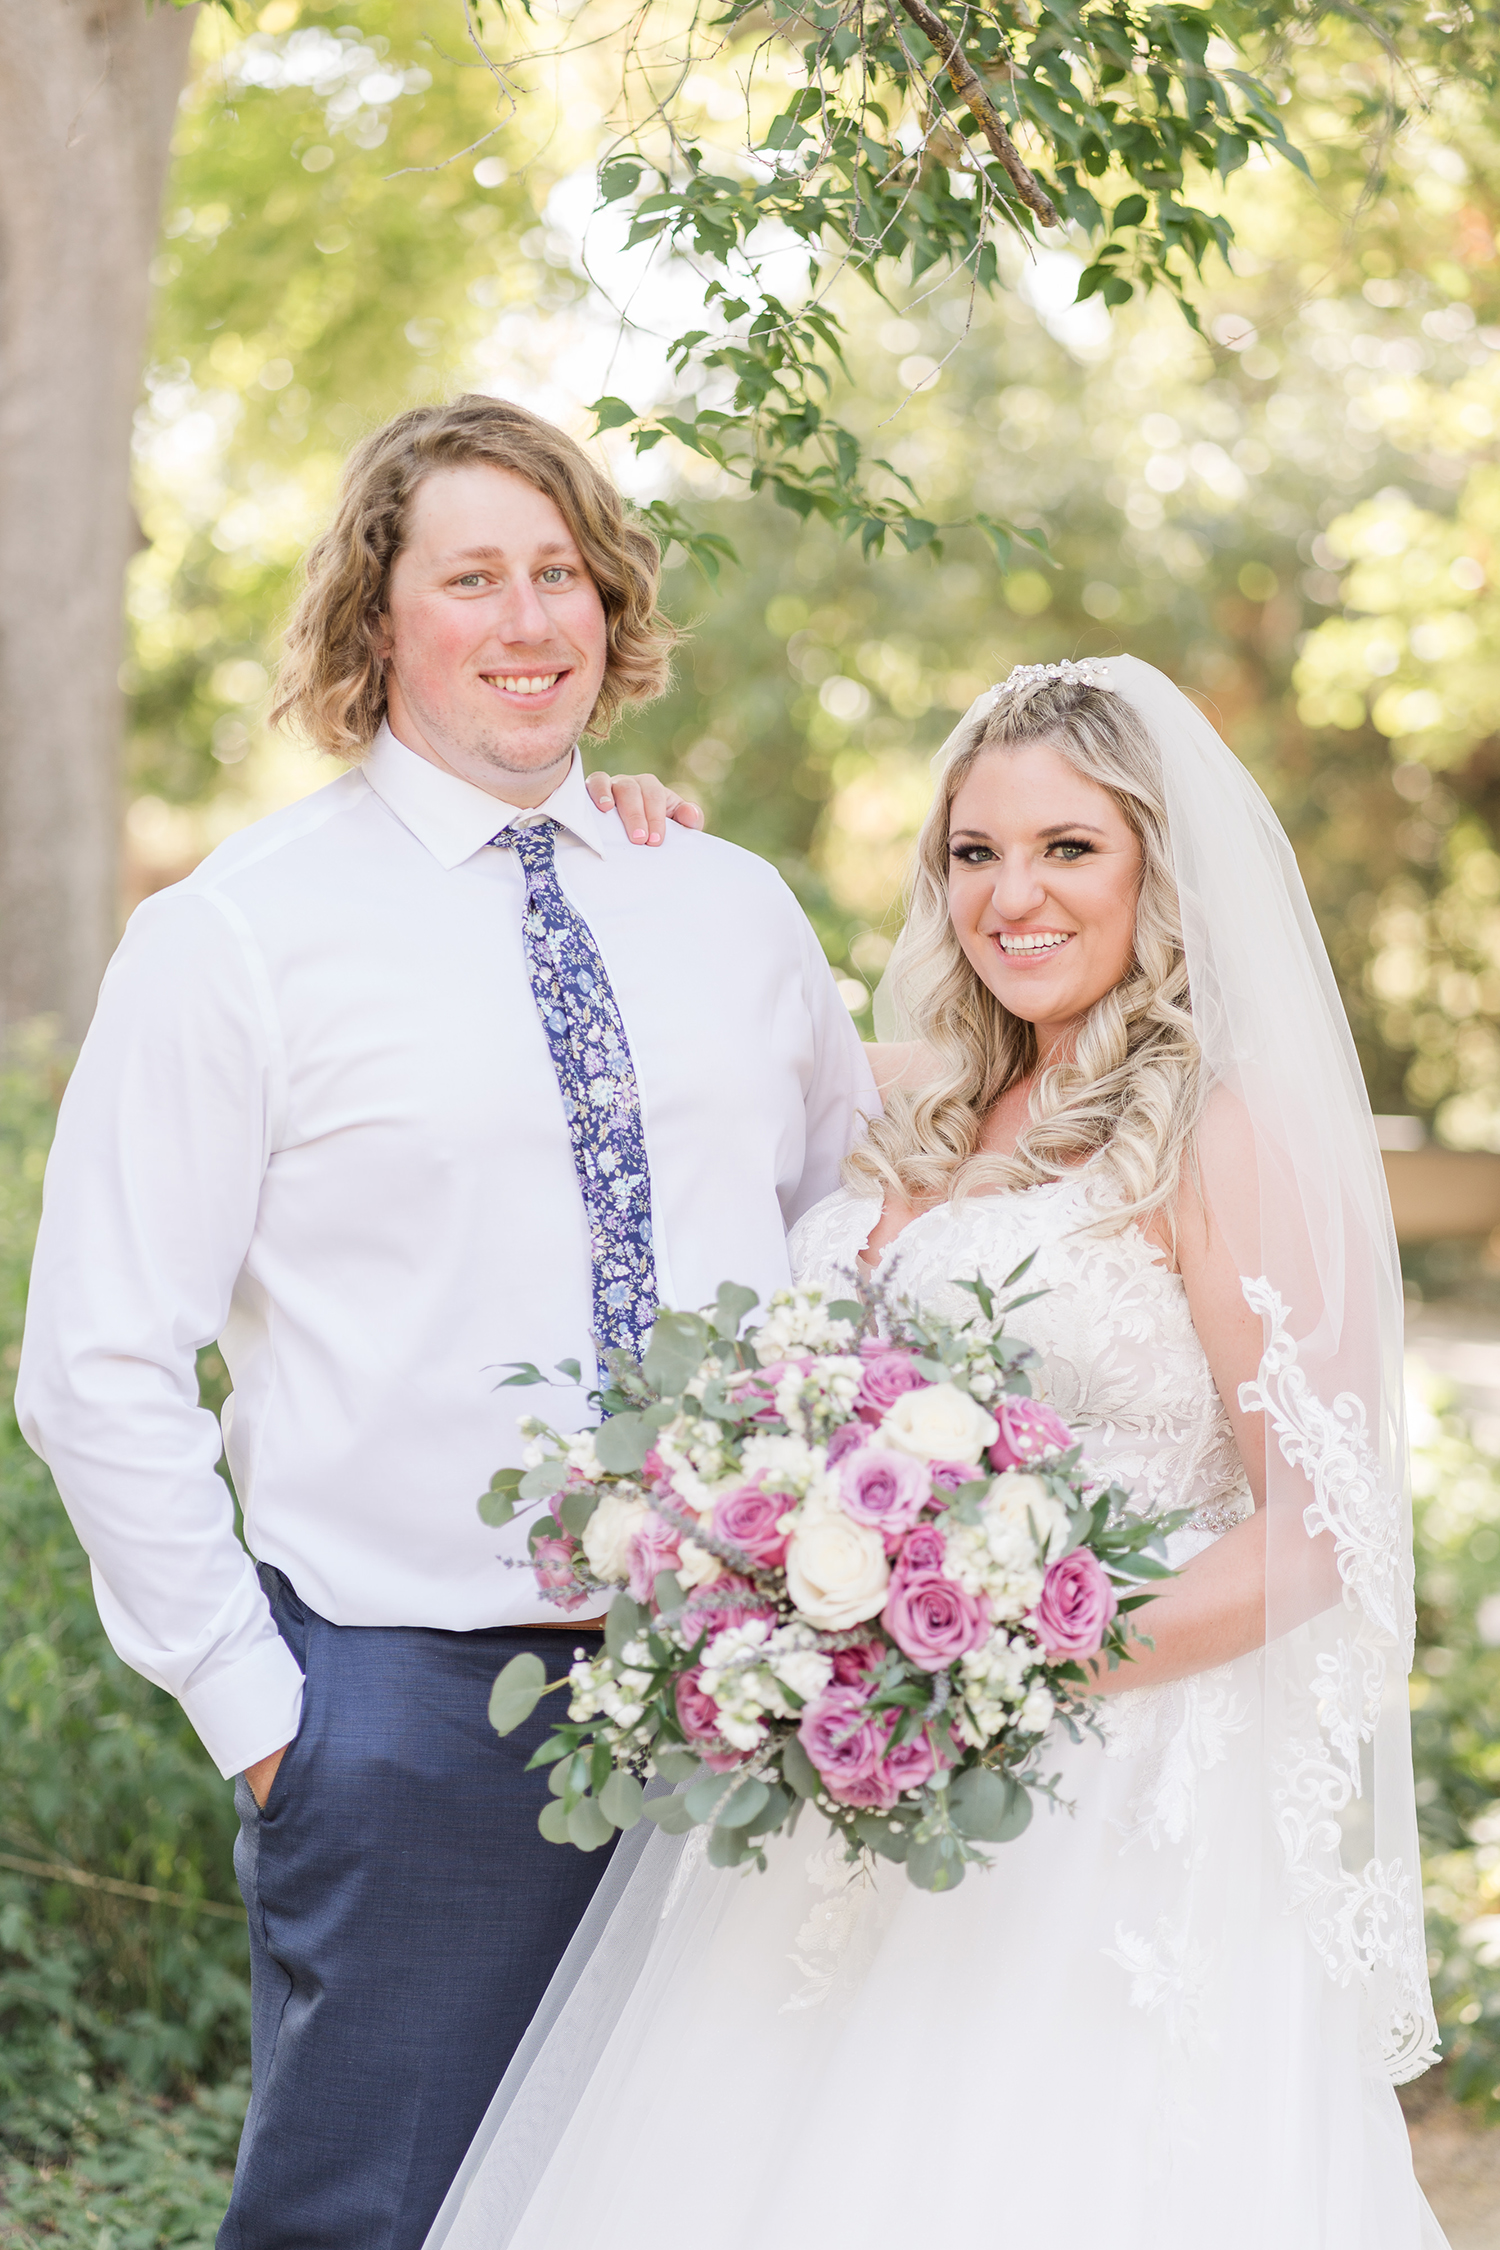 Rustic Barn Wedding in Davis couples portraits by Adrienne and Dani Photography